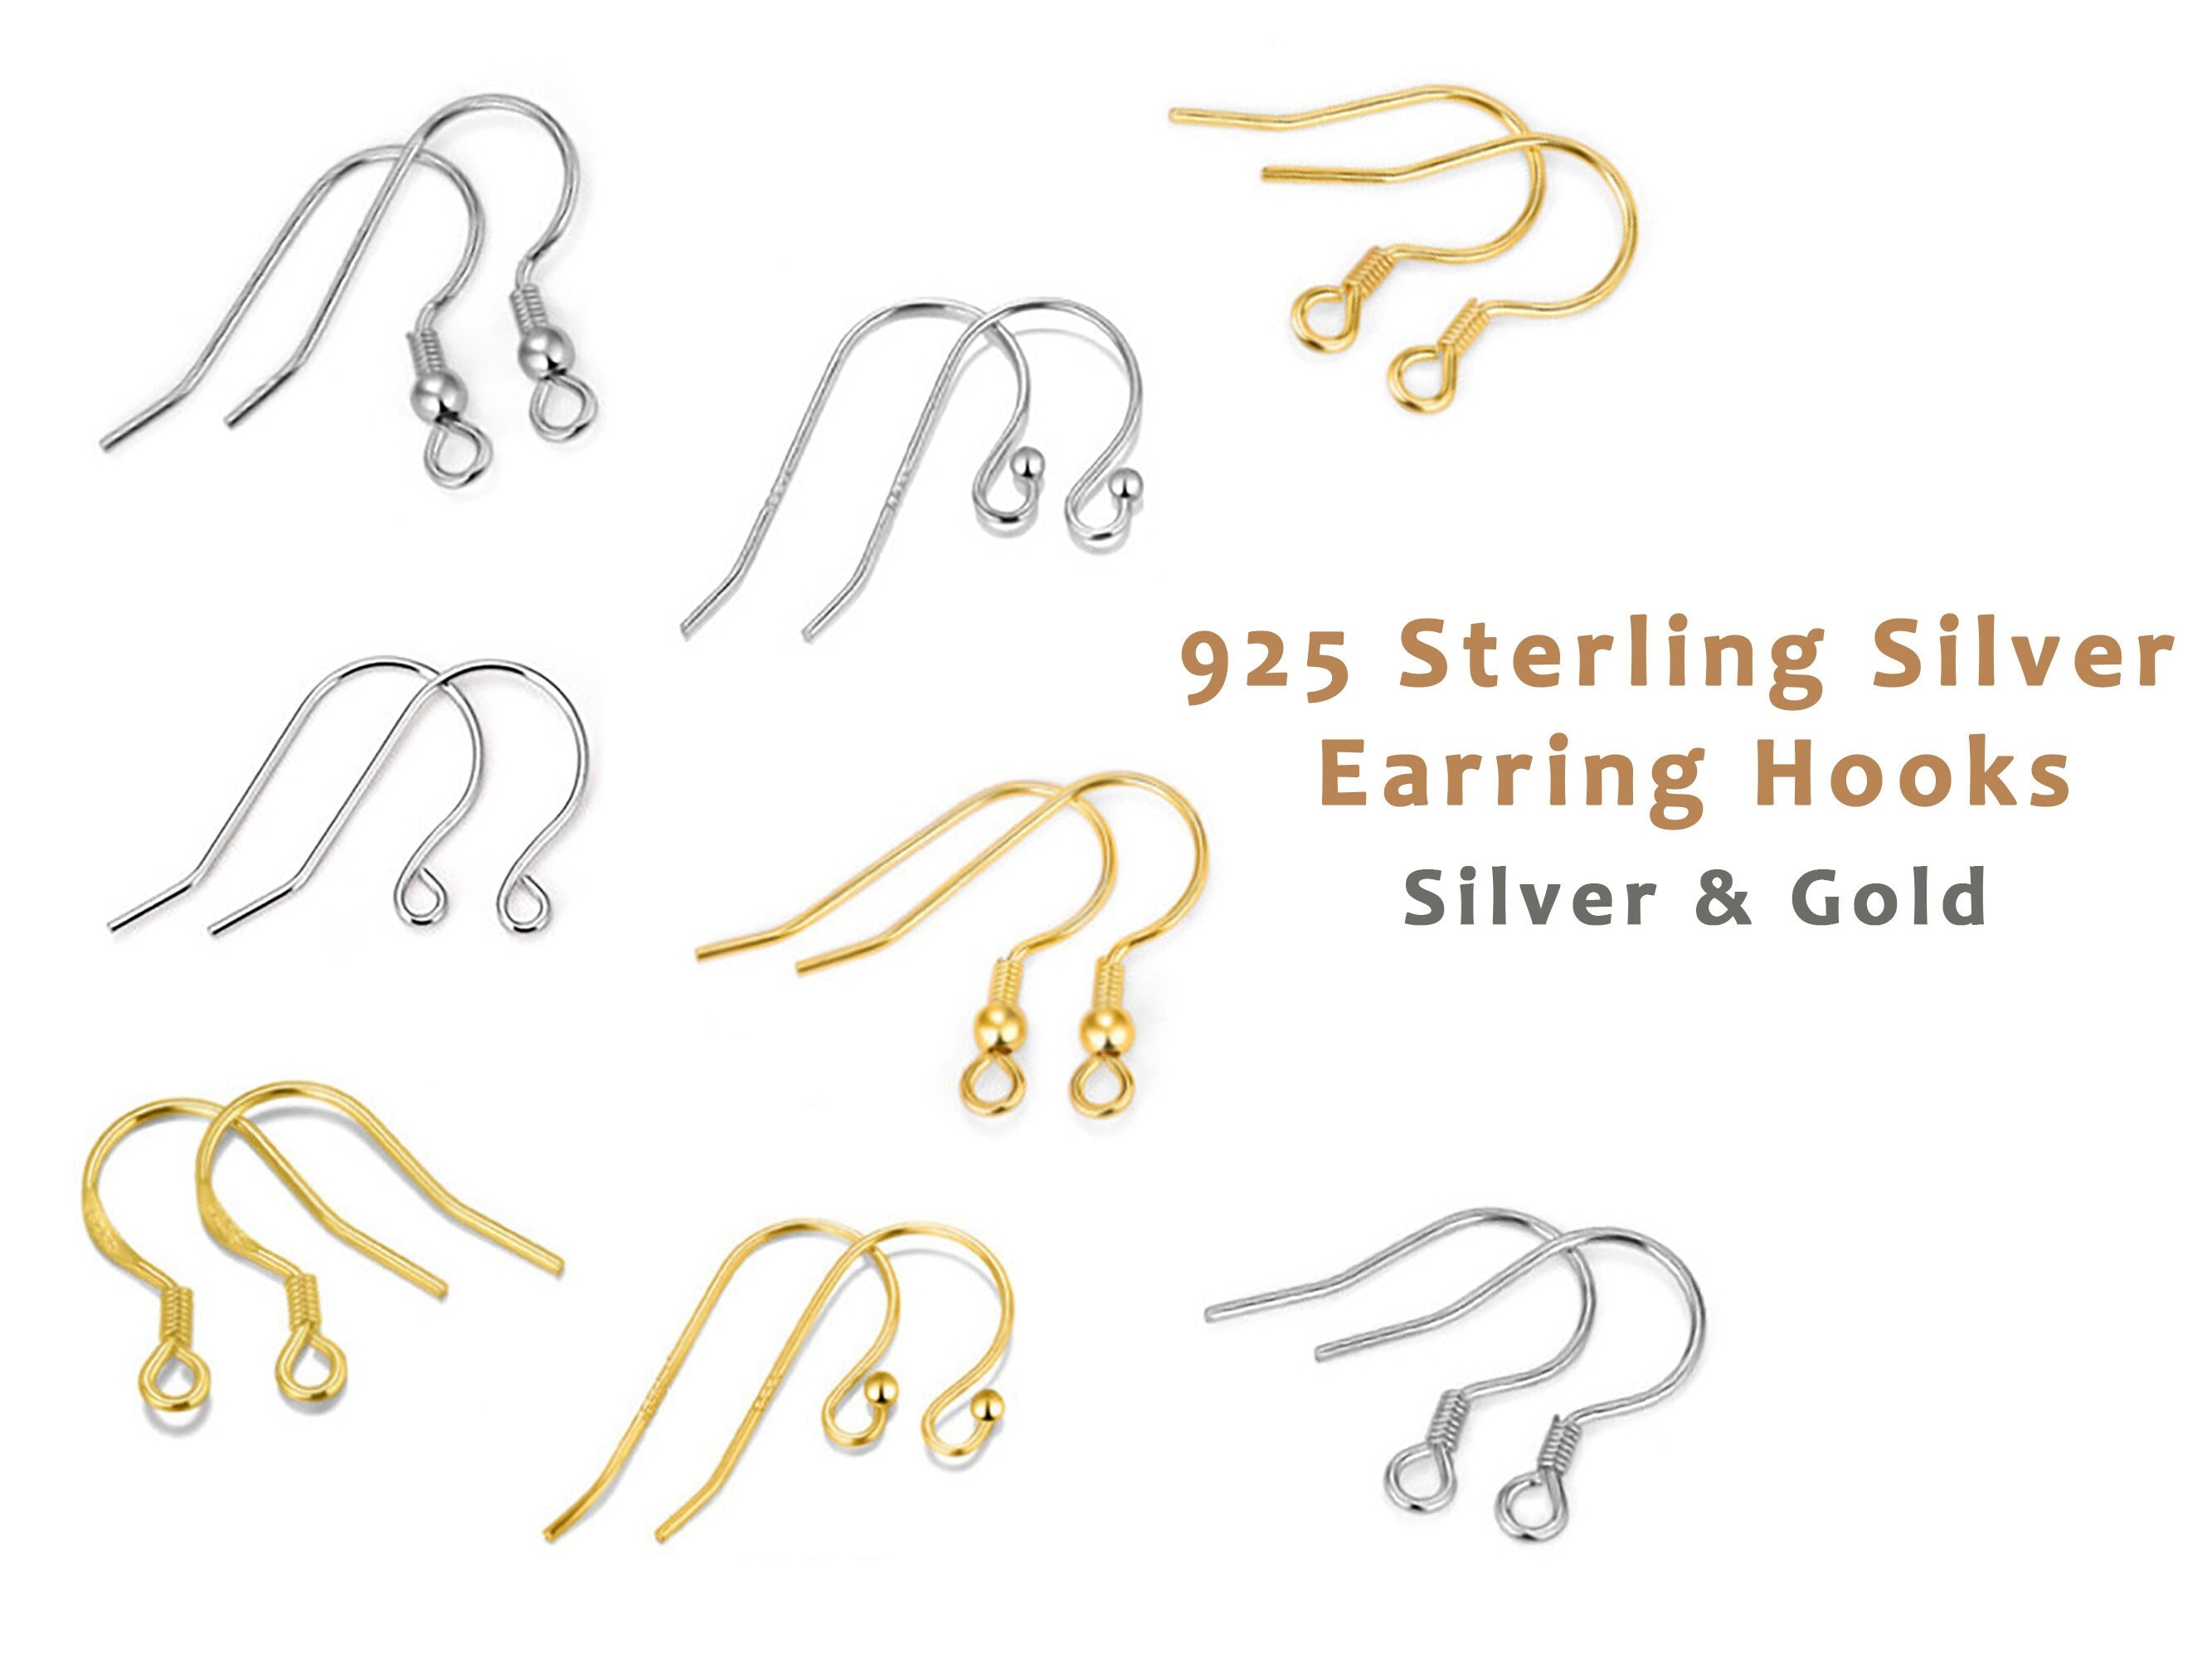 200 Pcs Brass Leverback Earring Findings French Earring Hooks Leverback  Earwires Earring Hooks Hypoallergenic Ear Wire with Open Loop for DIY  Earring Making Jewelry 4 Colors - Walmart.com